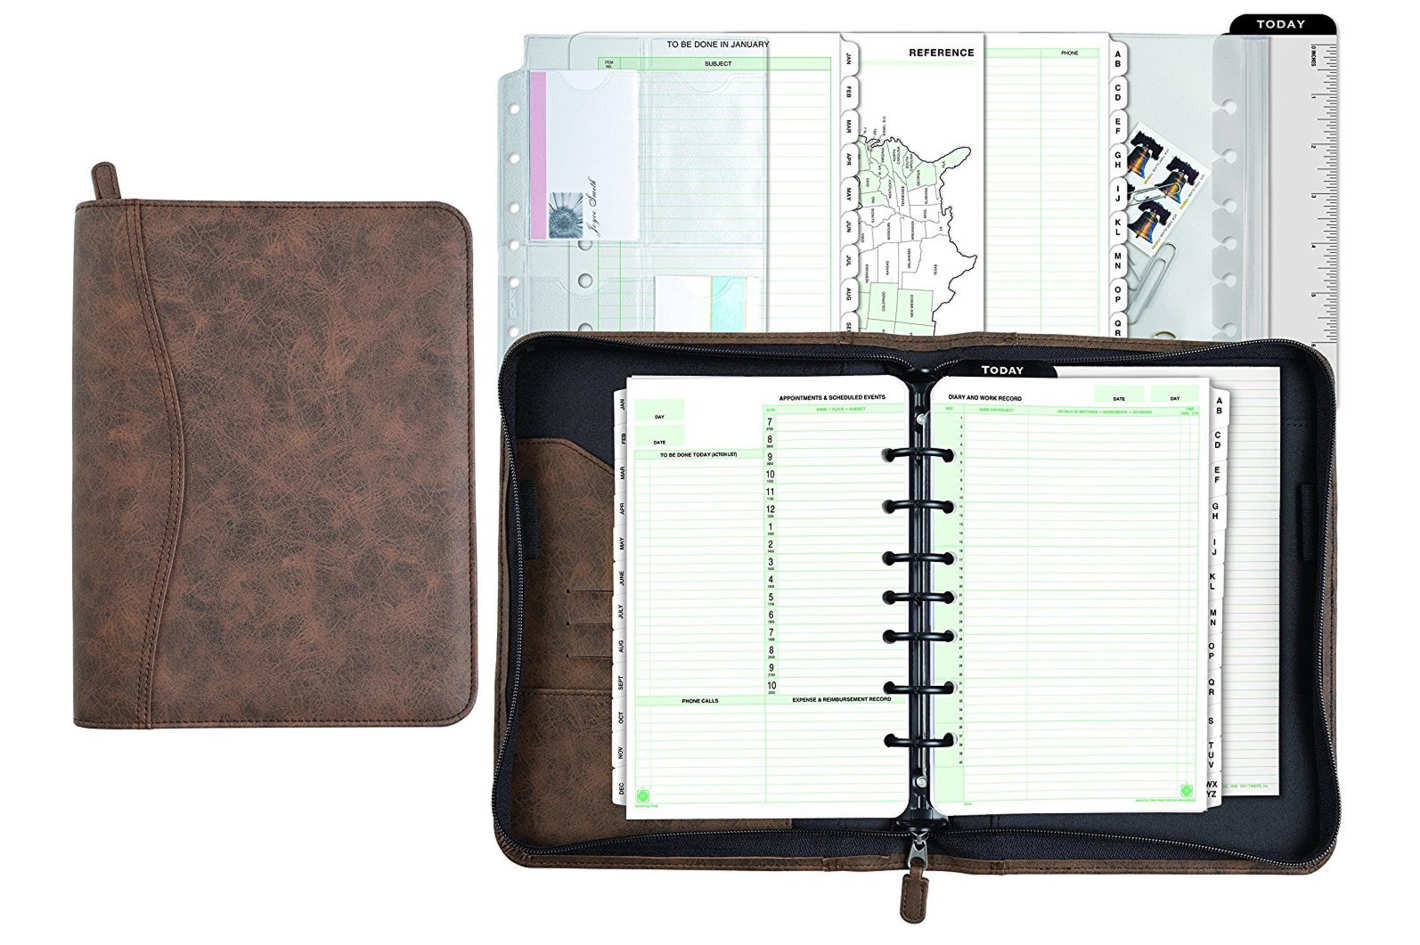 Day Planner Organizer
 10 Best Planners for 2019 According to Productivity Experts